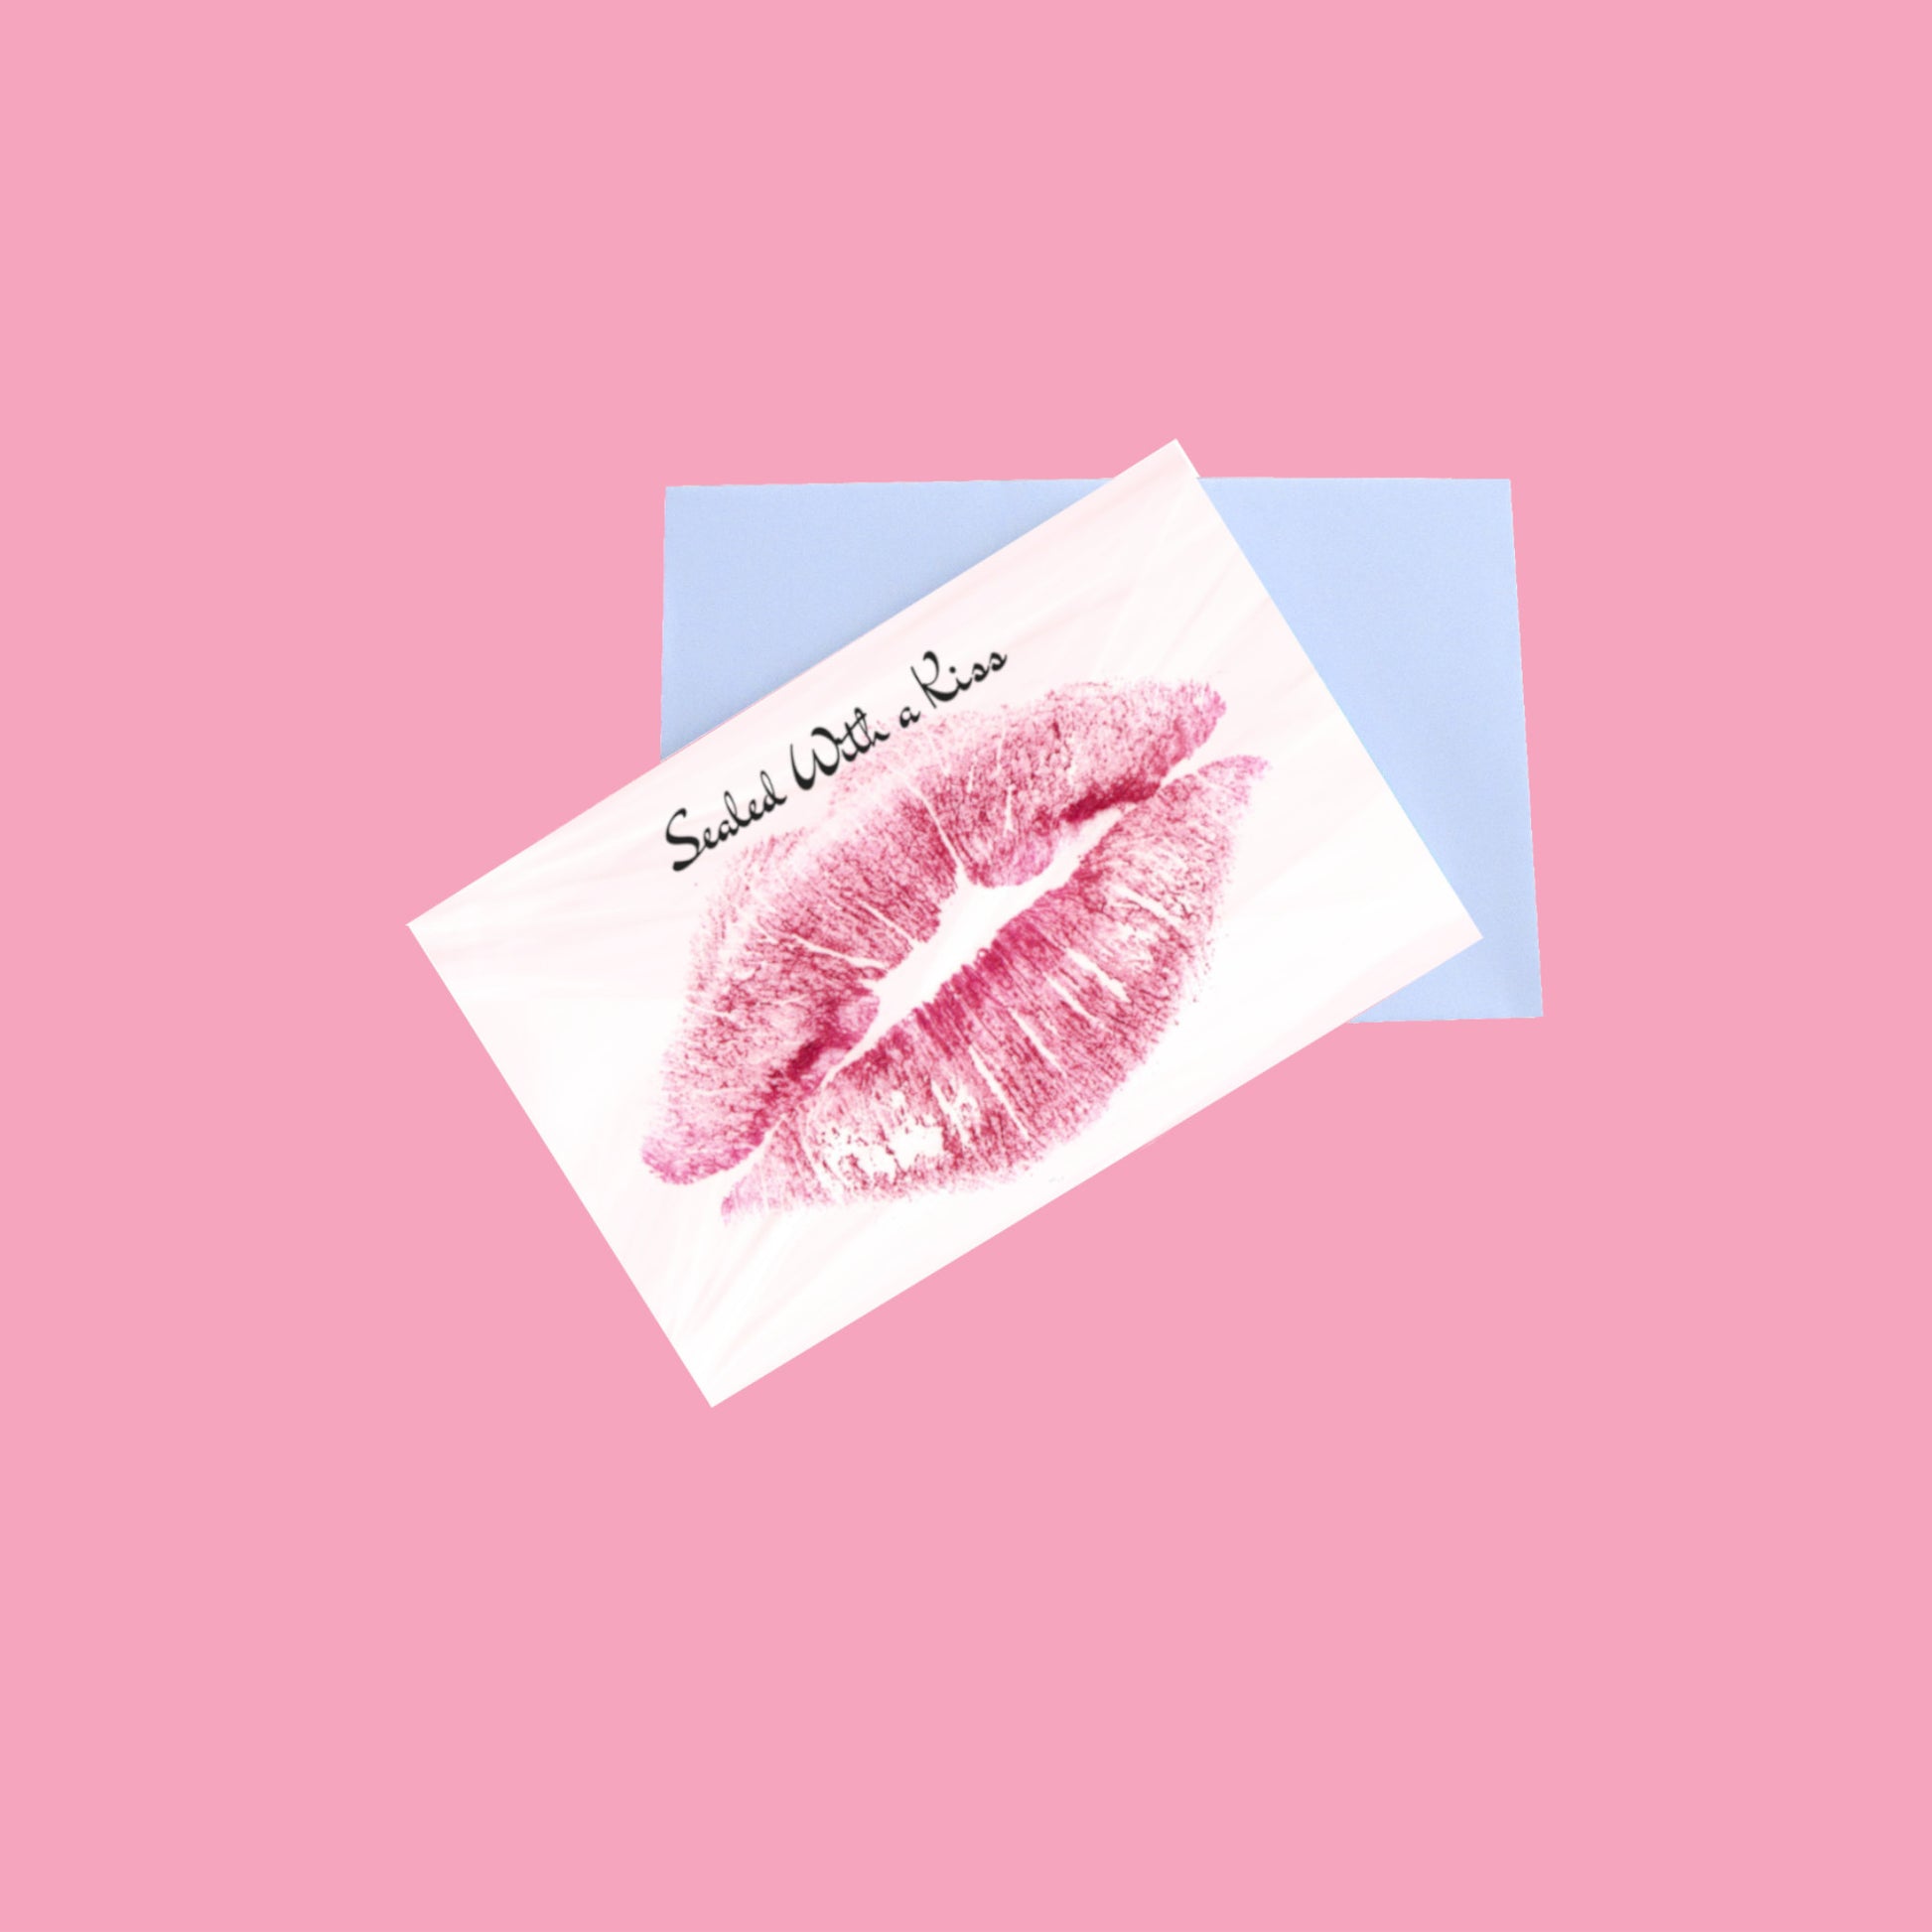 Sealed With a Kiss 8.5x5.5 Greeting Card and Envelope